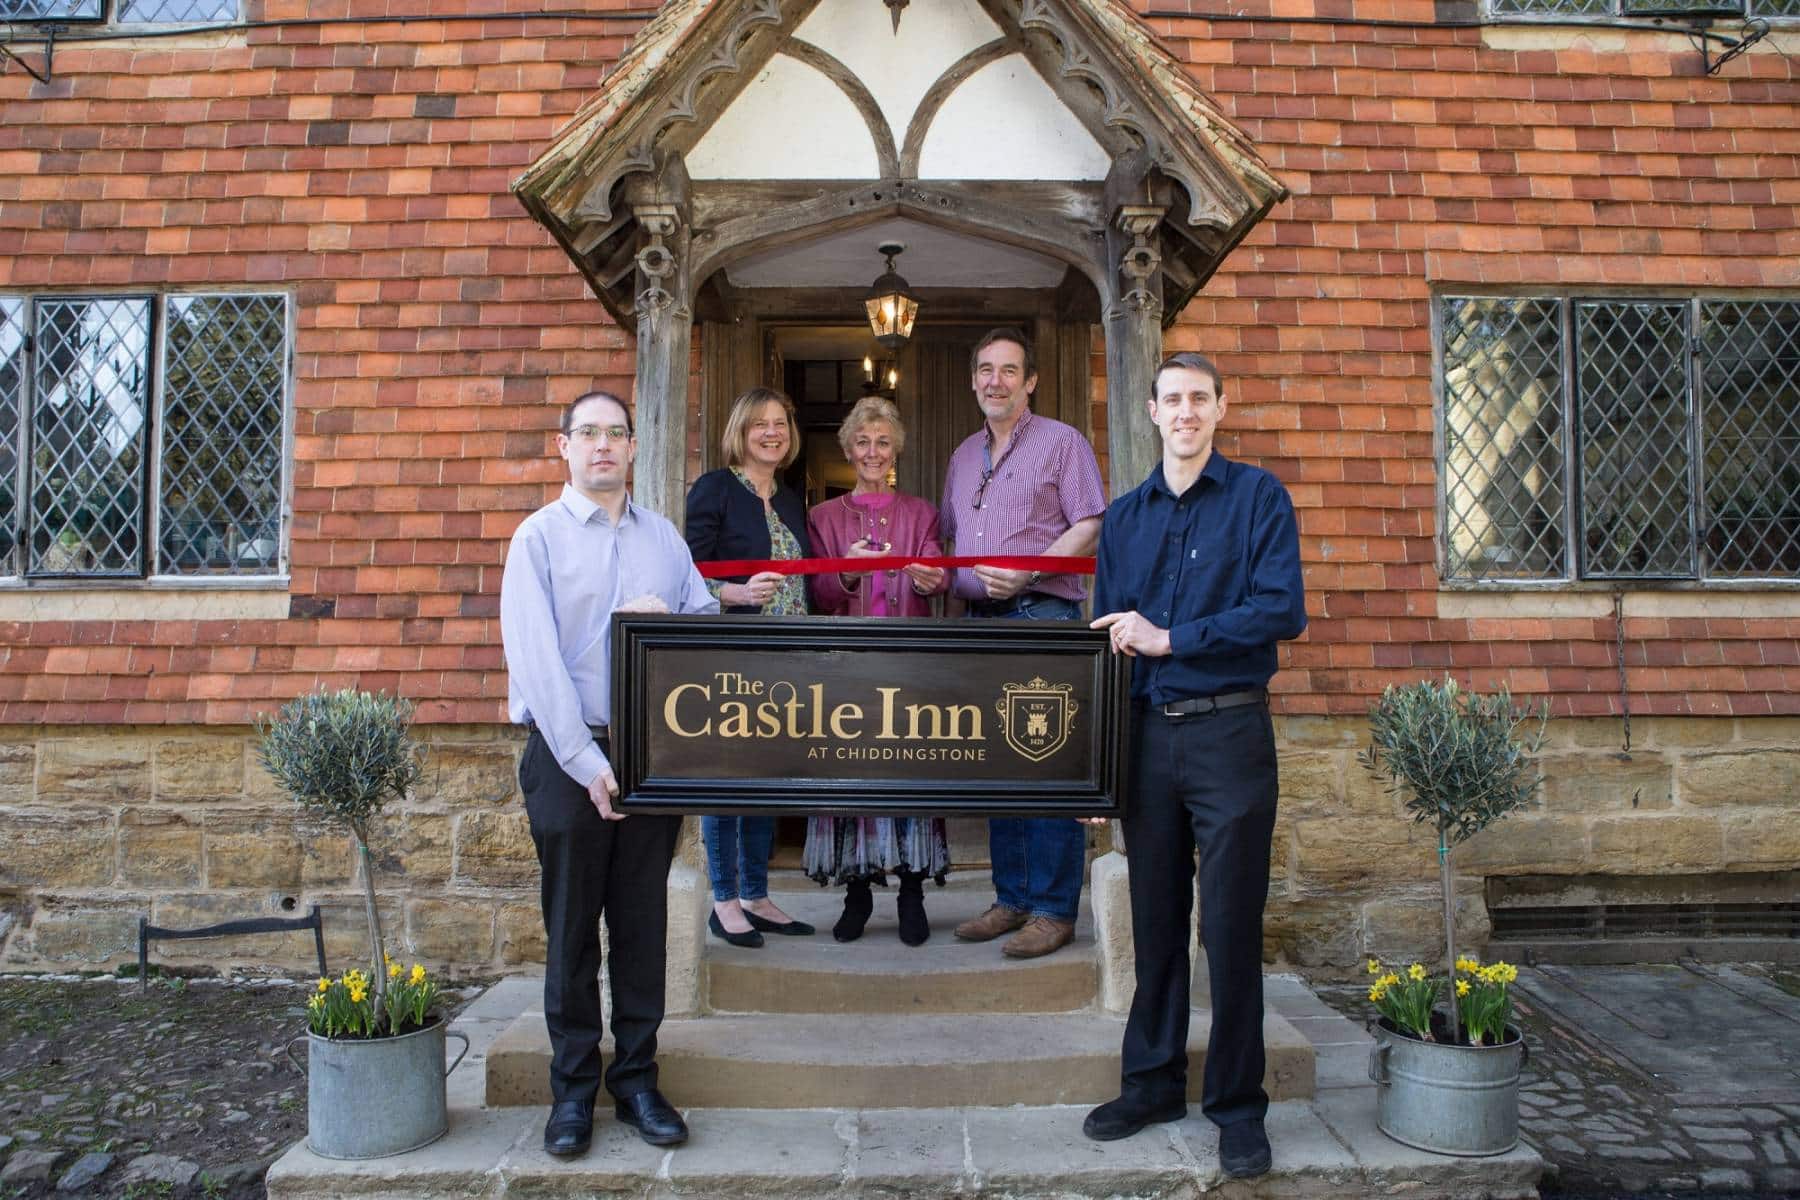 Relief all round as Castle pub reopens after year of uncertainty